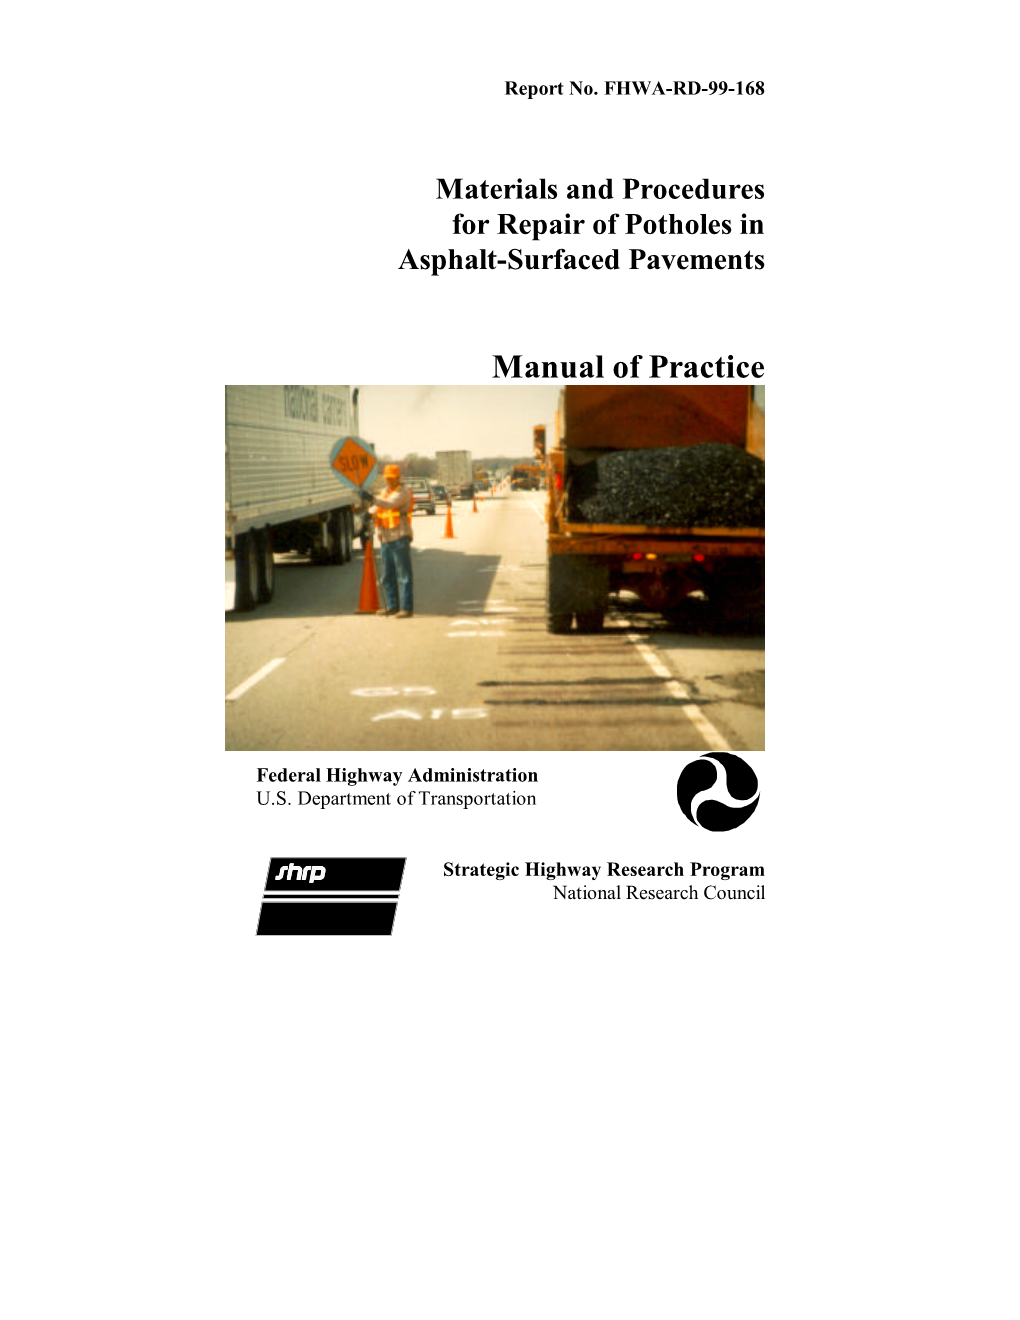 Materials and Procedures for Repair of Potholes in Asphalt-Surfaced Pavements